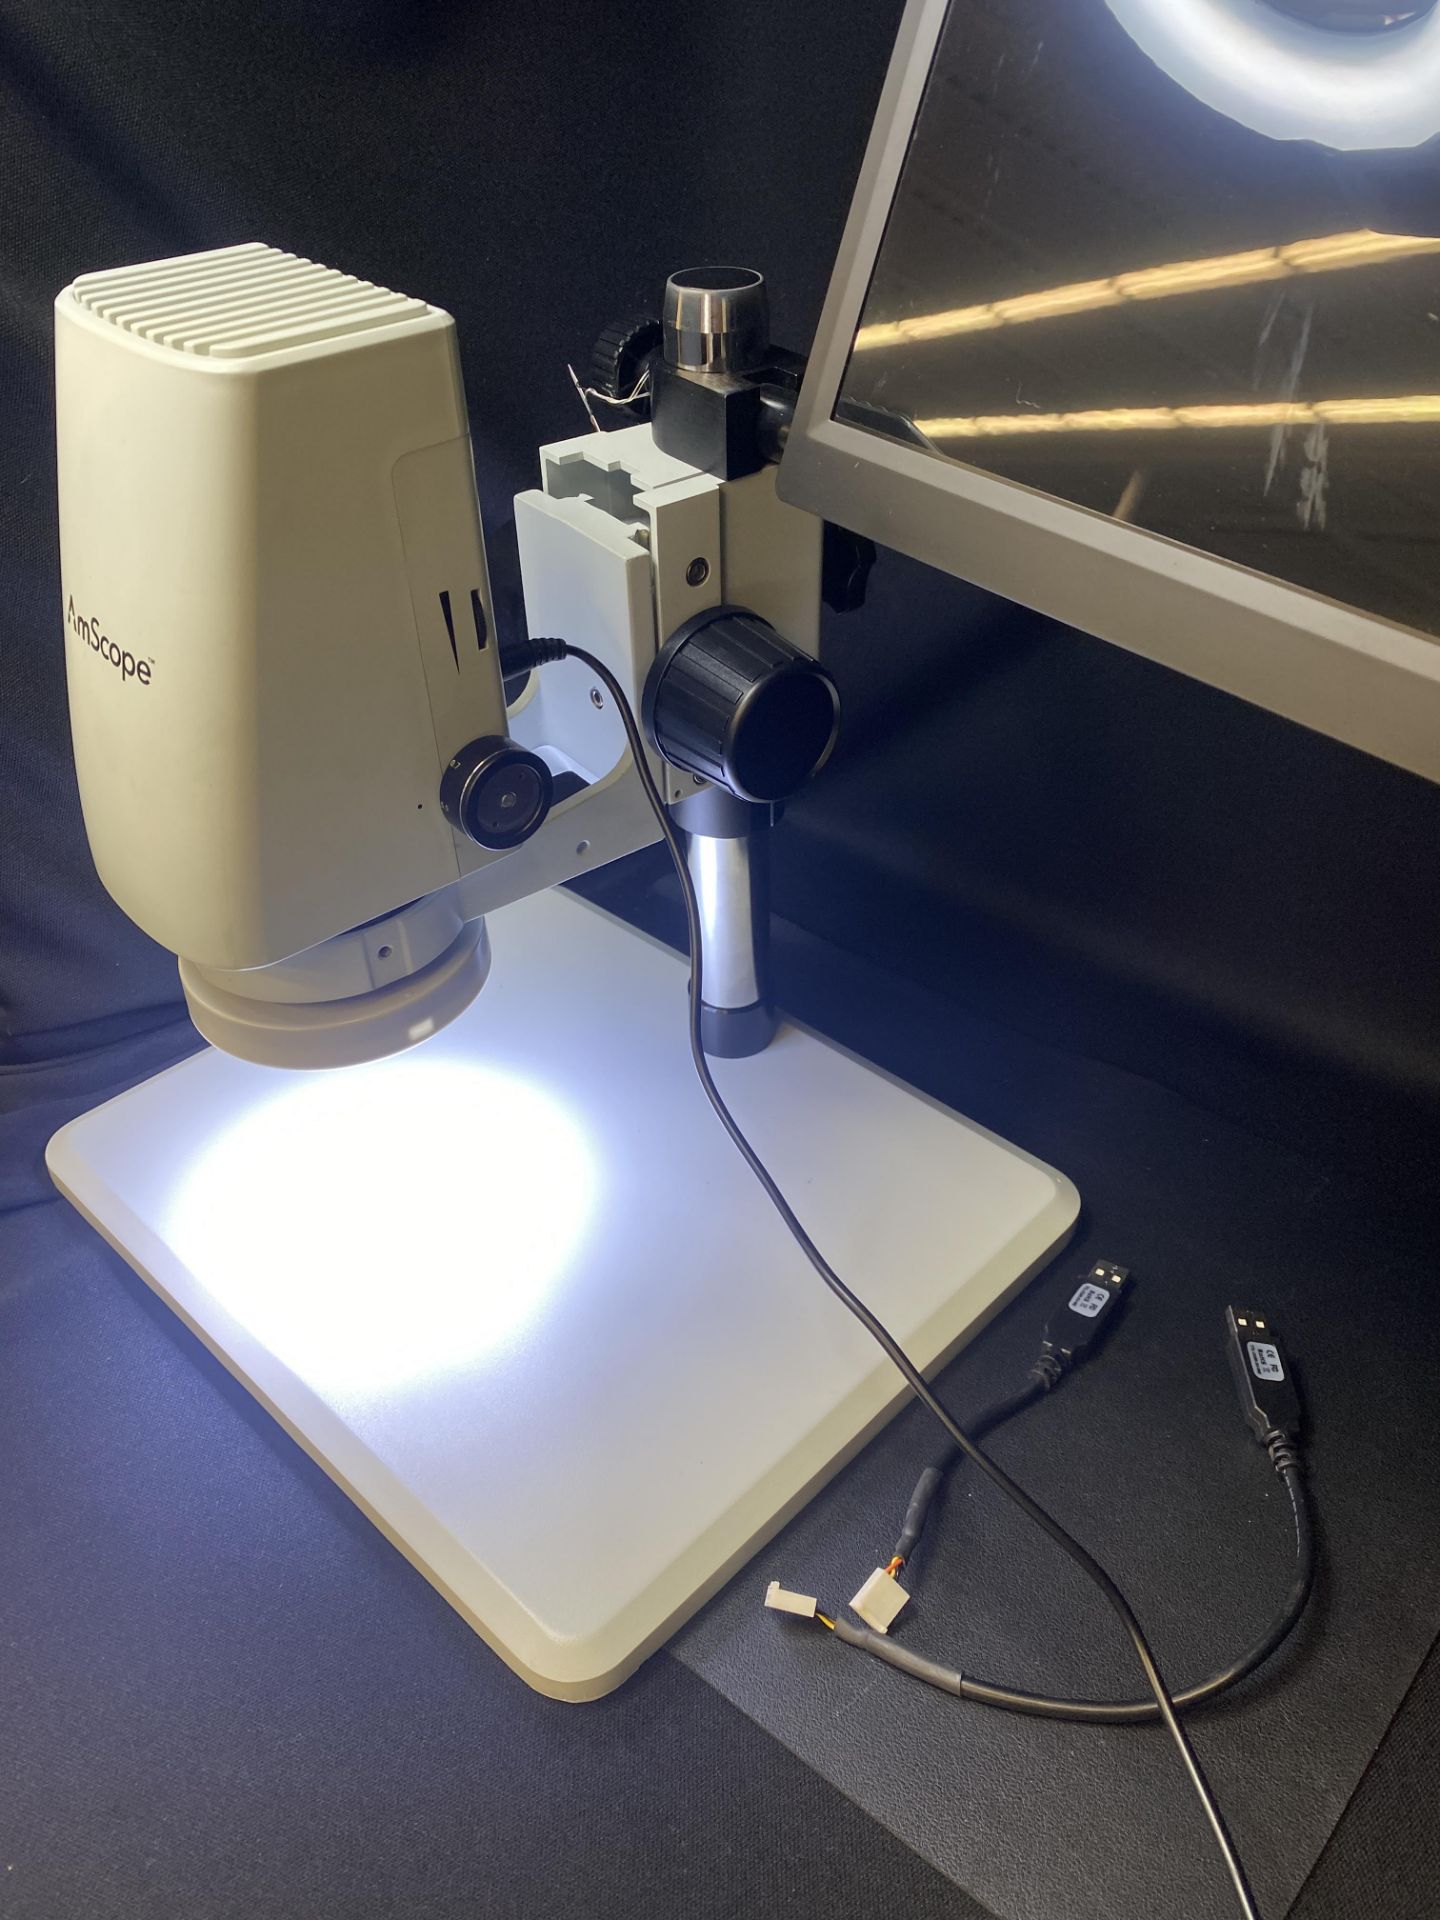 Amscope Tabletop Video Inspection LED Microscope w/Monitor - Image 3 of 4